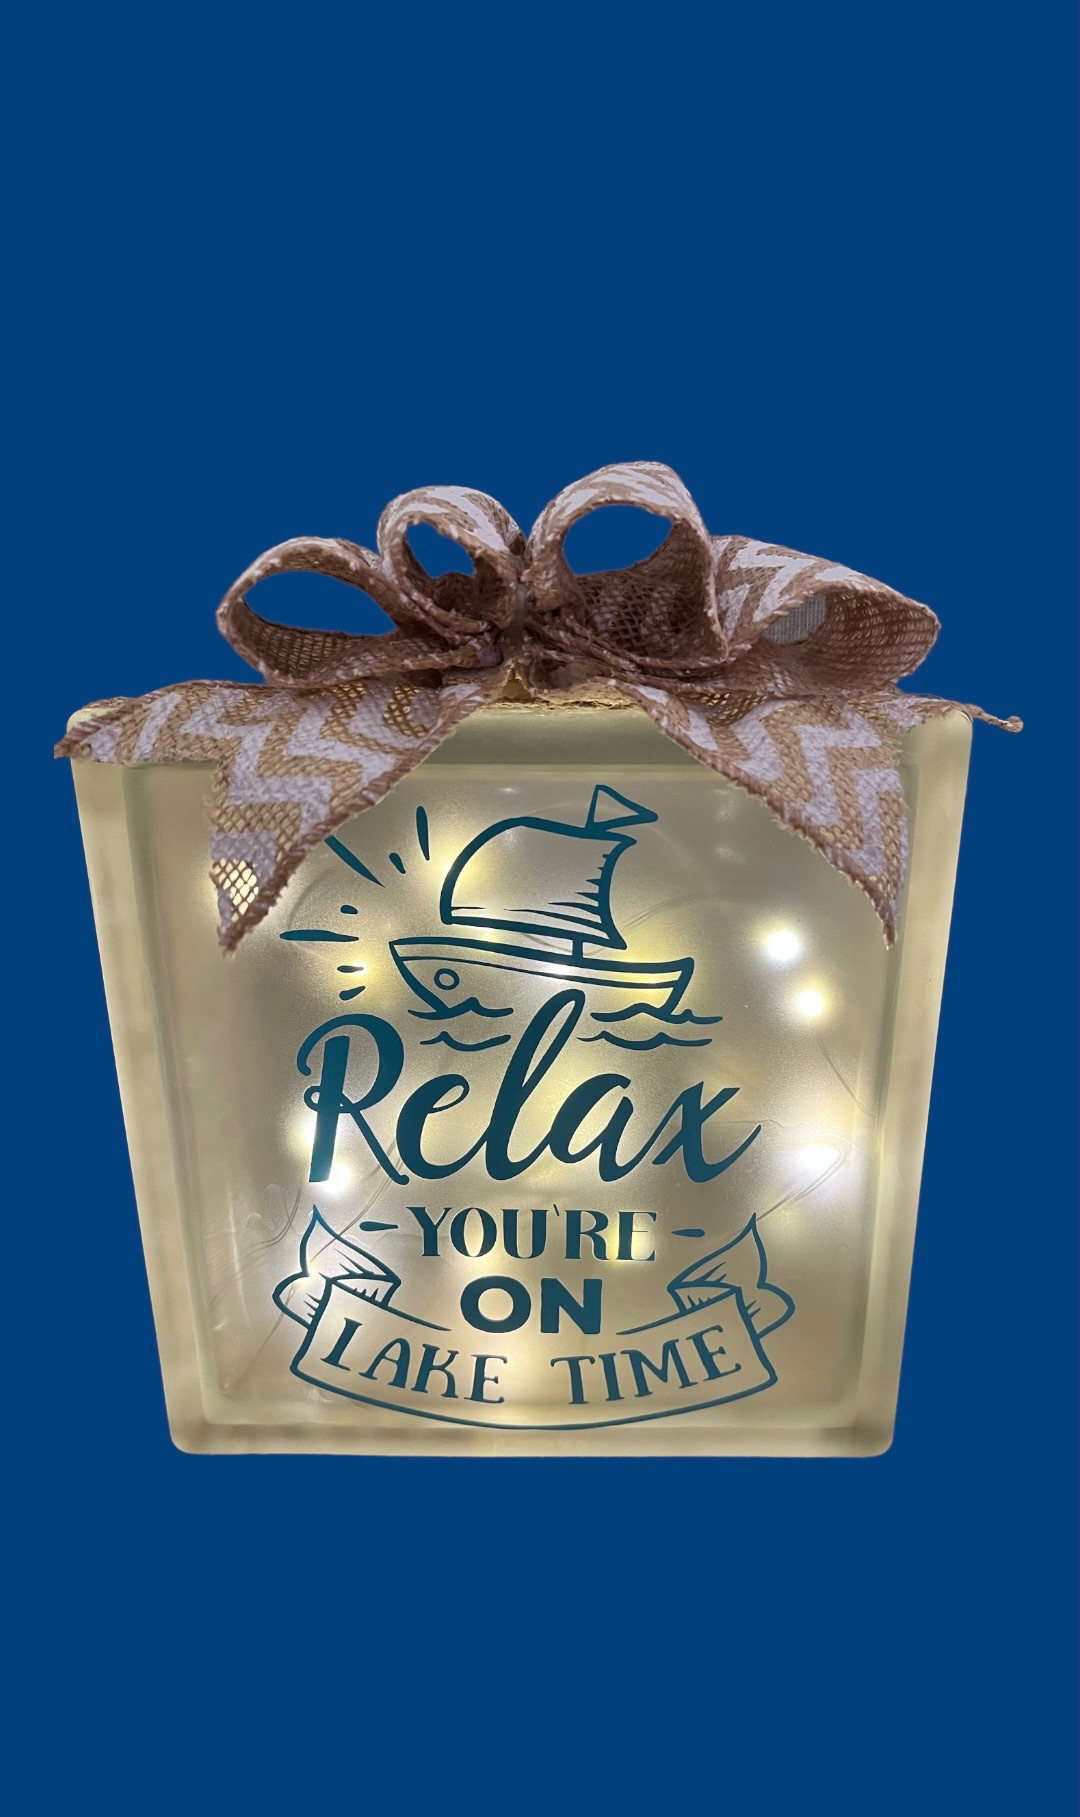 This Relax You're on Lake Time is made with love by Duo Deesigns! Shop more unique gift ideas today with Spots Initiatives, the best way to support creators.